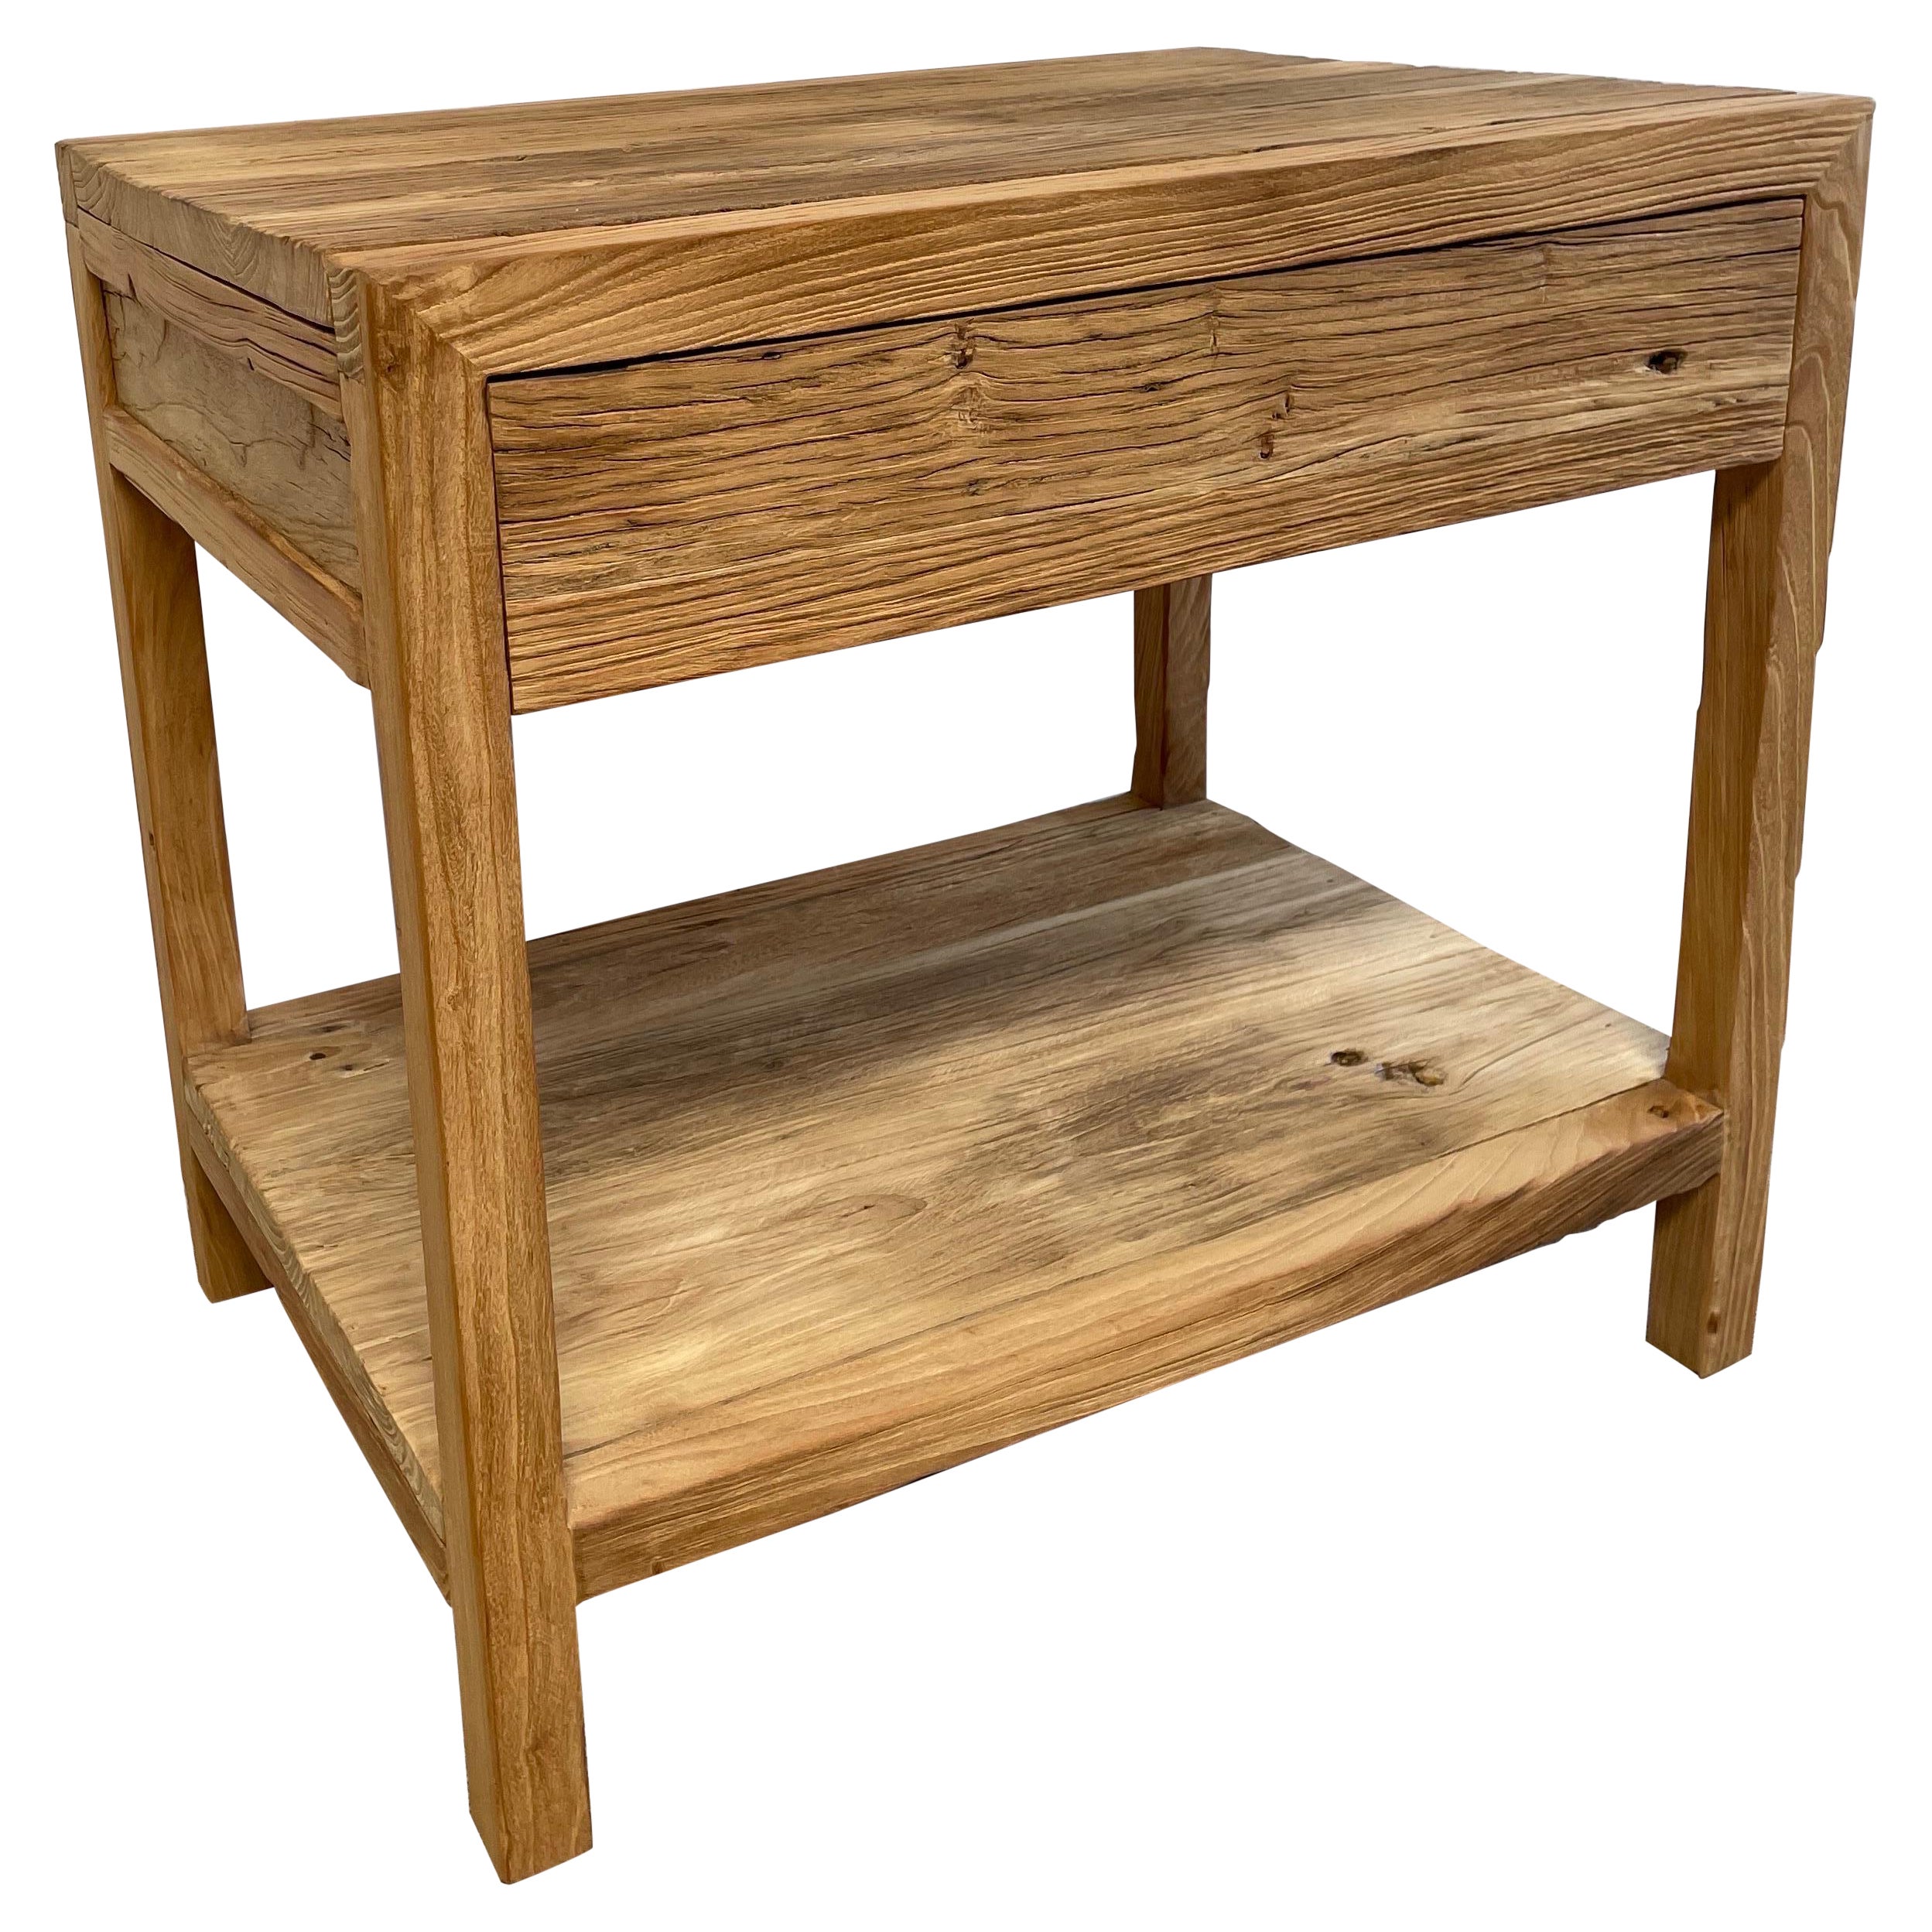 Custom Large Elm Wood Single Drawer Night Stand Natural Finish For Sale